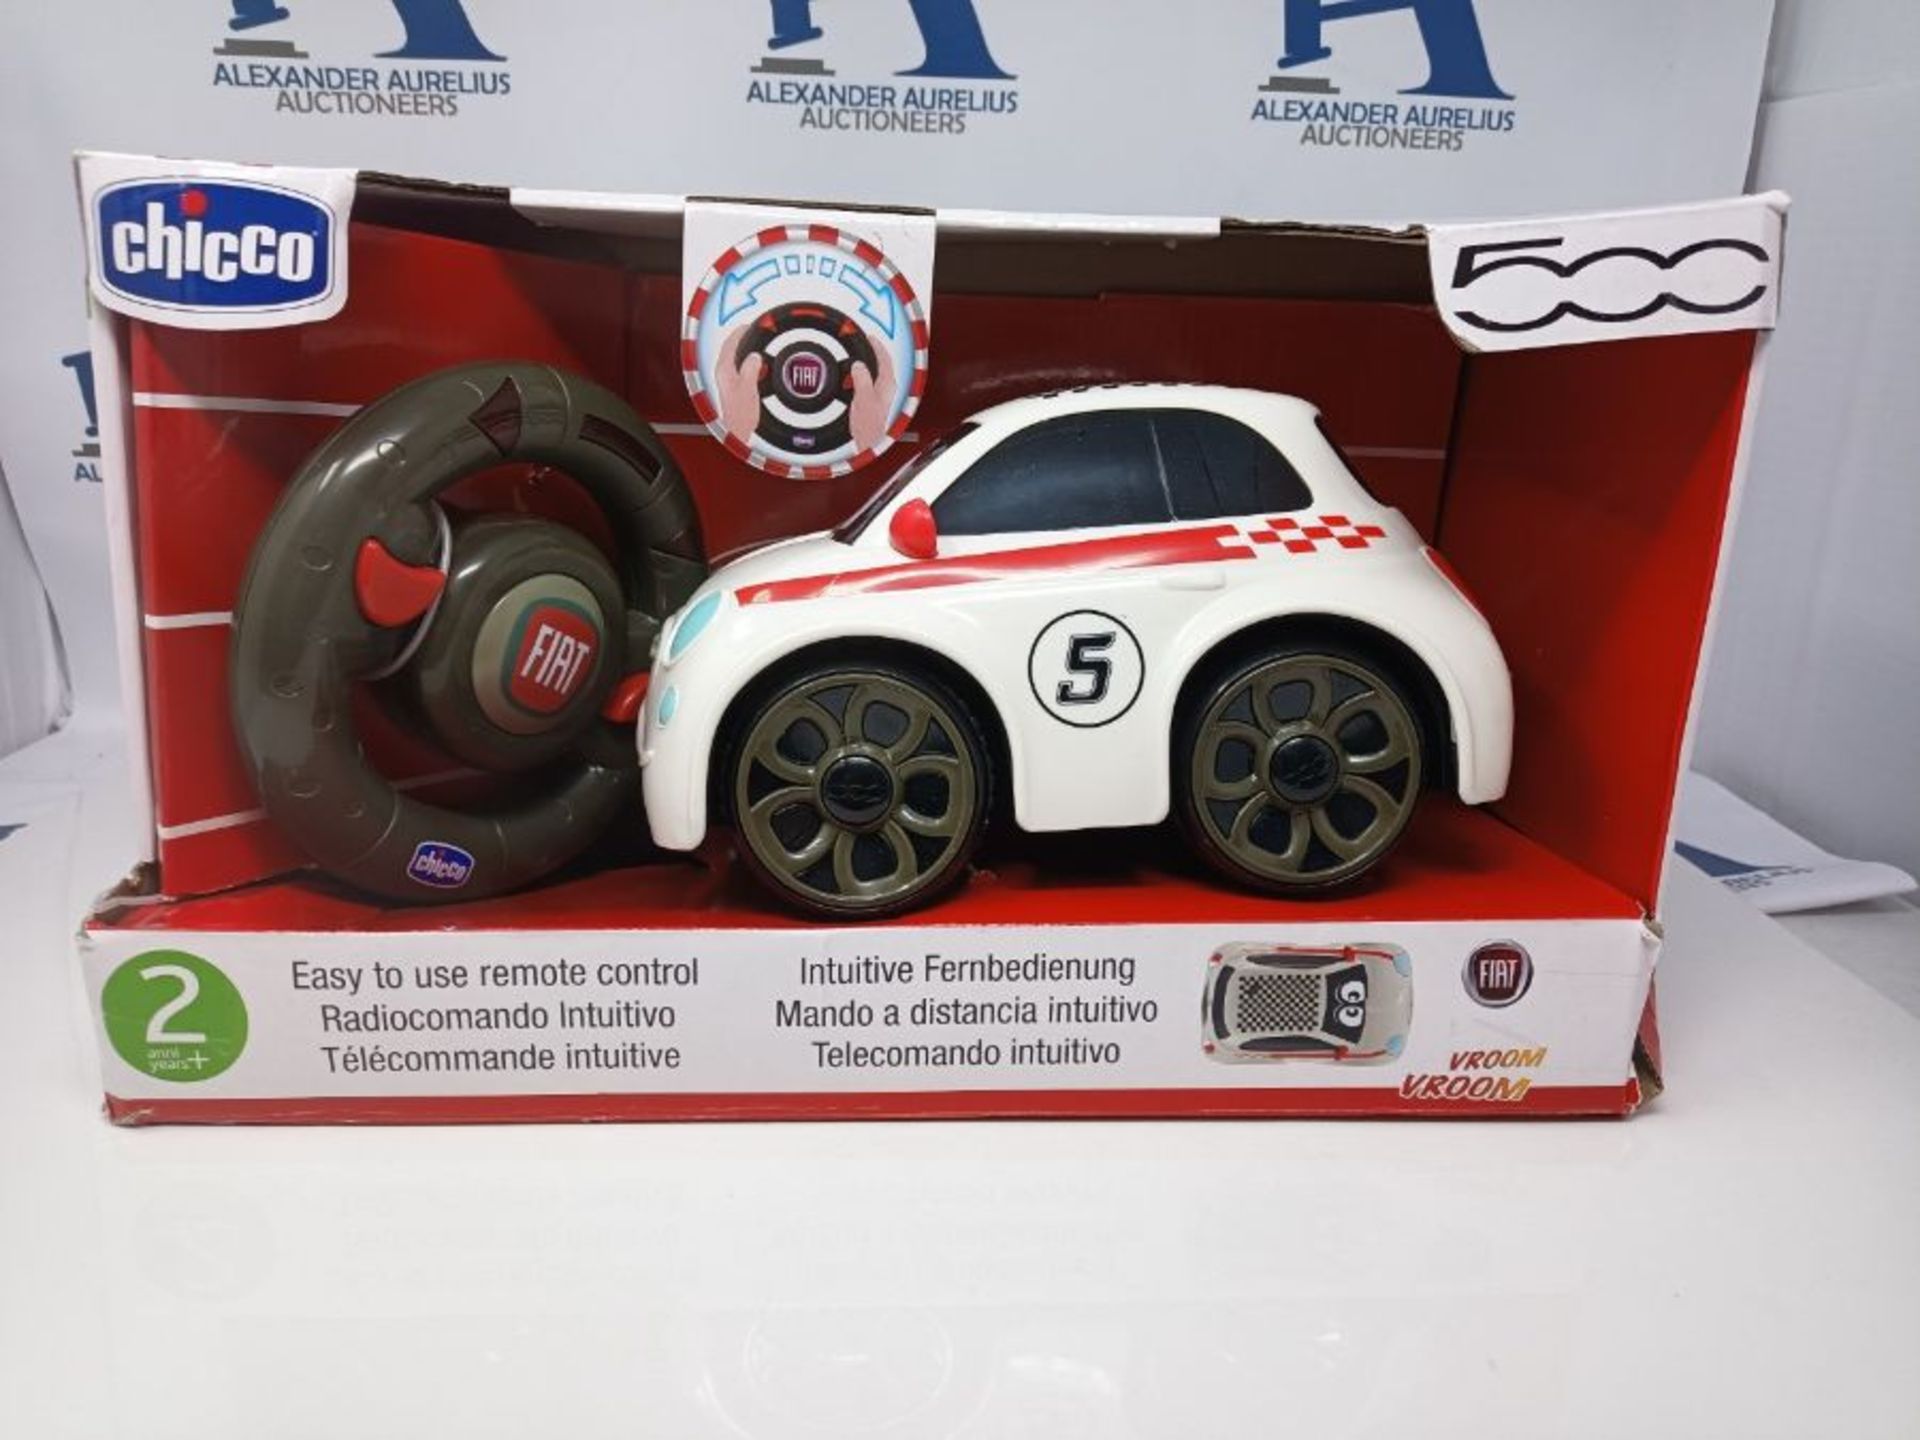 Chicco Fiat 500 Sport Remote Control Car for Kids, Radio Controlled Car with Intuitive - Image 2 of 3